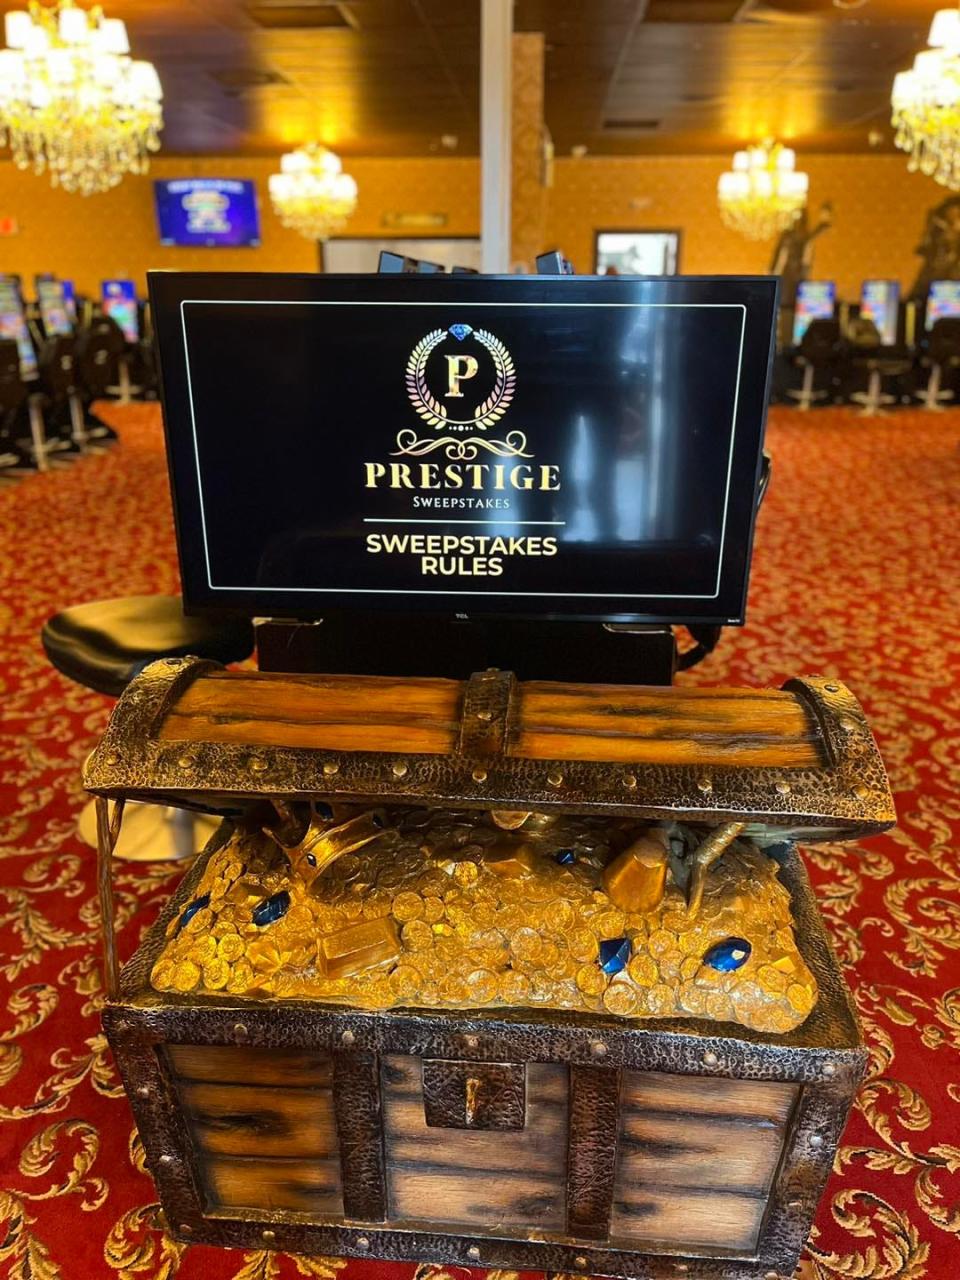 Prestige Sweepstakes, an adult arcade midway between Fort Pierce and Port St. Lucie in the 4400 block of U.S. 1 off Tumblin King Road in St. Lucie County, was raided by sheriff's deputies and state gaming agents Thursday, January 18, 2024. After a search by state and local law enforcement, three people, including the owner, were arrested and over $18,000 and slot machines were seized, according to the St. Lucie County Sheriff's Office.